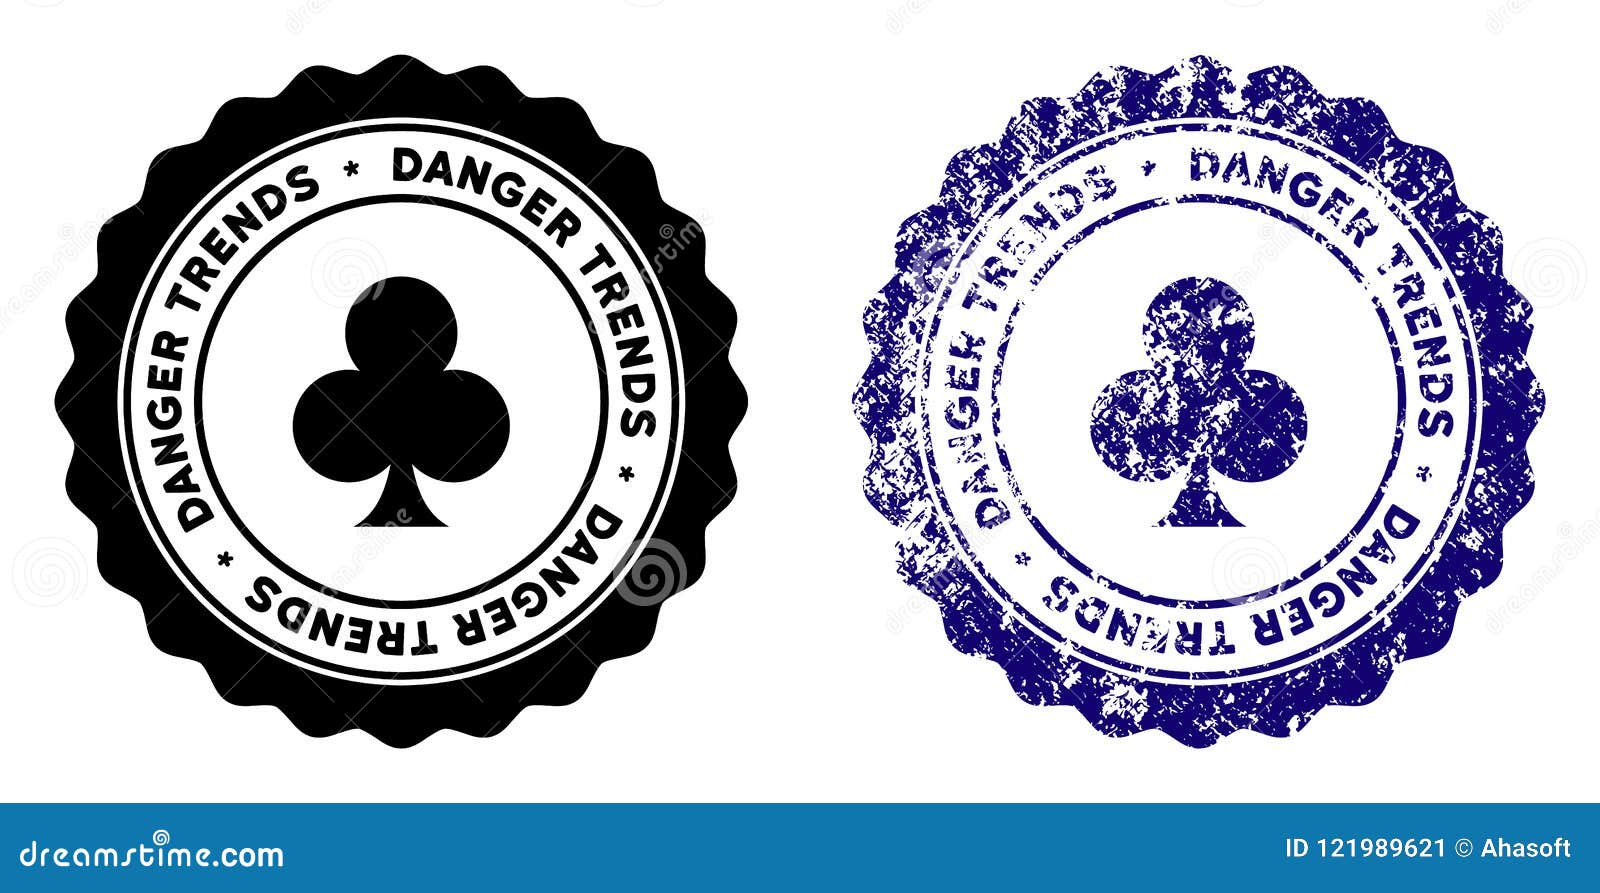 Gambling Danger Trends Stamp With Grungy Style Stock Vector ... Danger Stamp